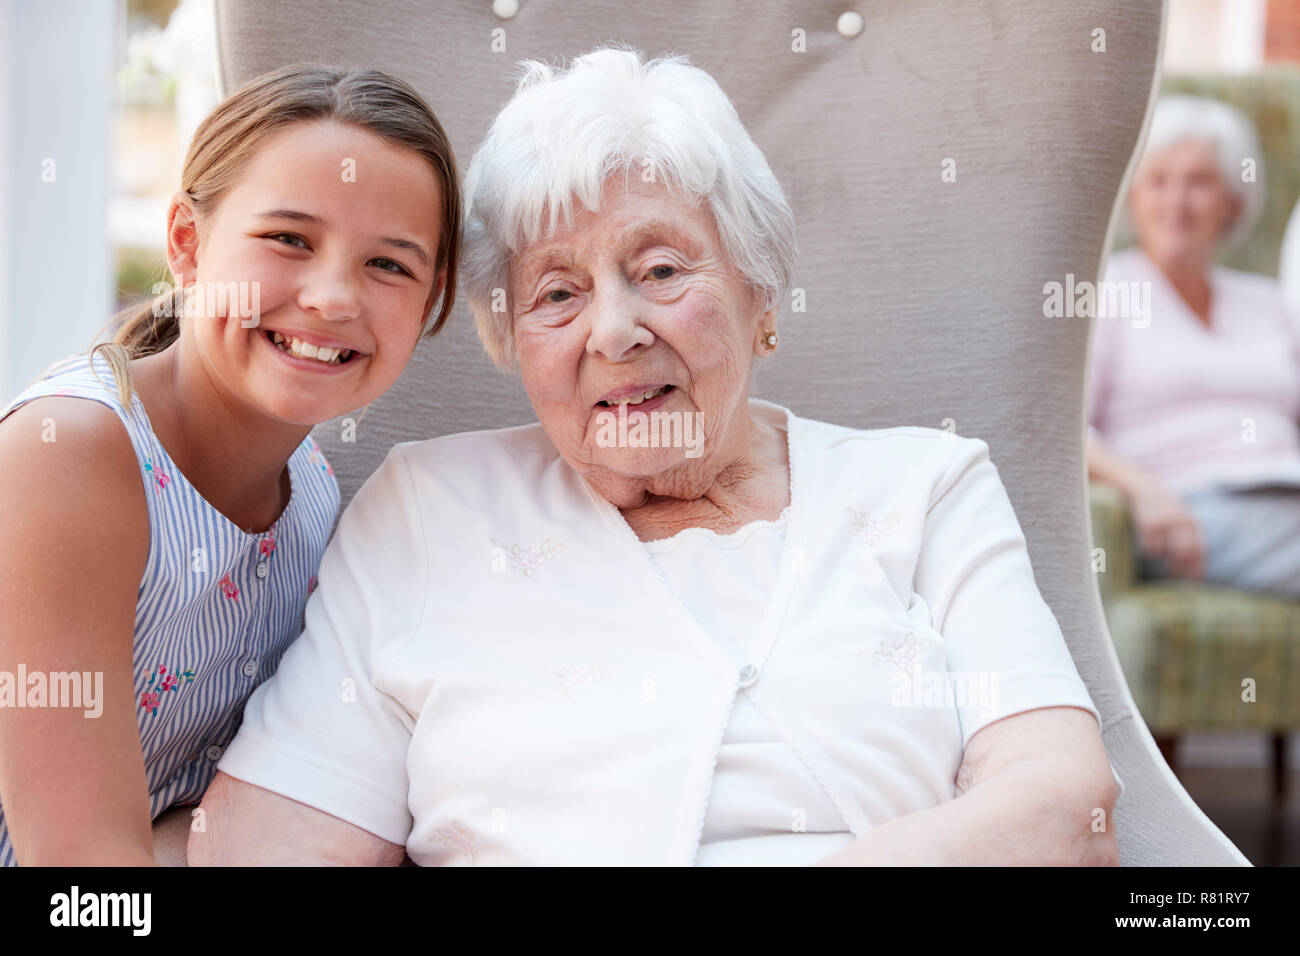 Portrait Of Granddaughter Visiting Grandmother In Retirement Home Stock Photo